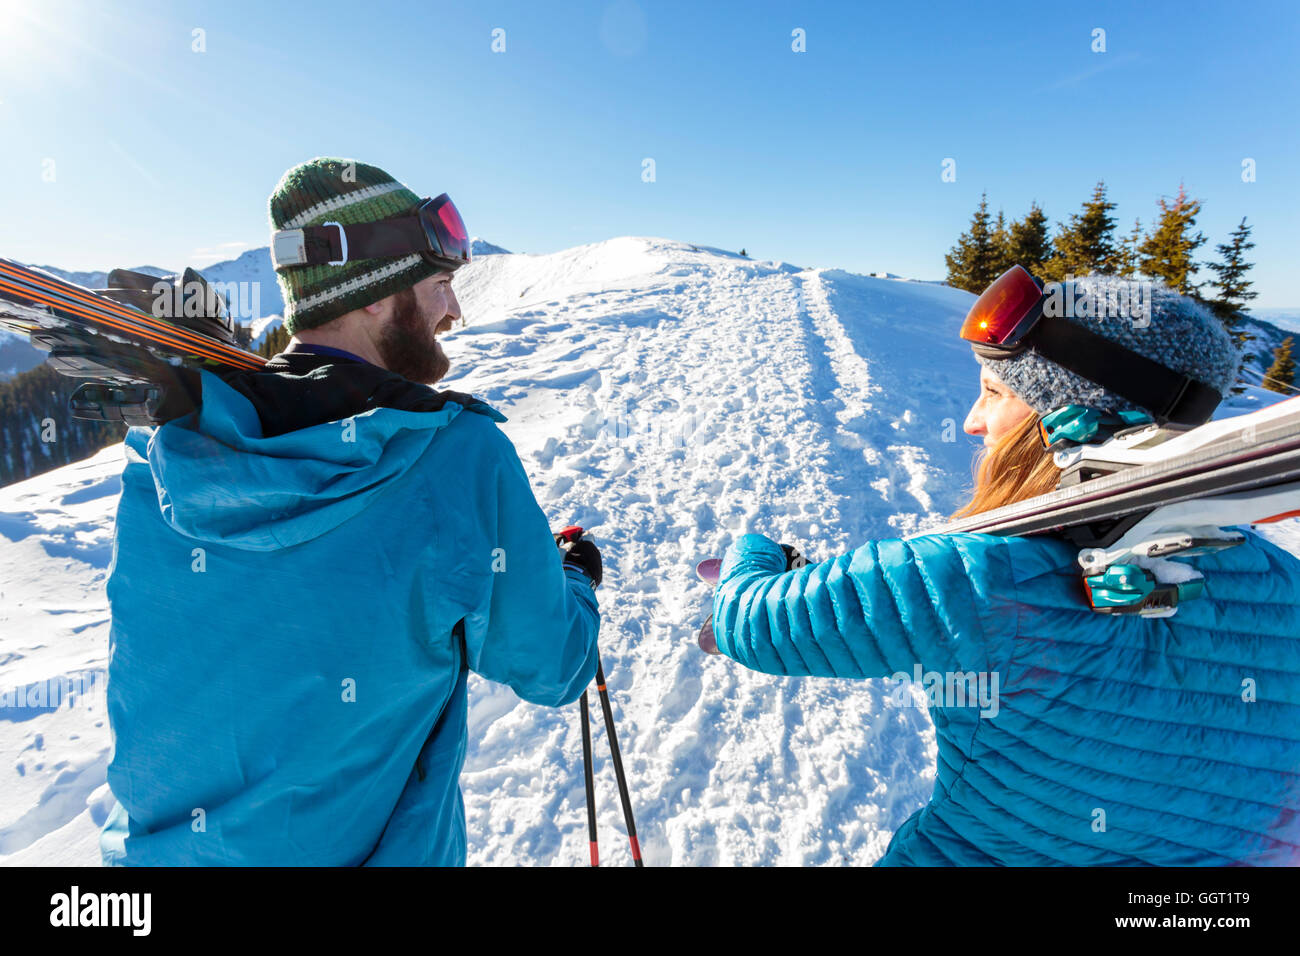 Couple carrying skis on snowy mountain Banque D'Images